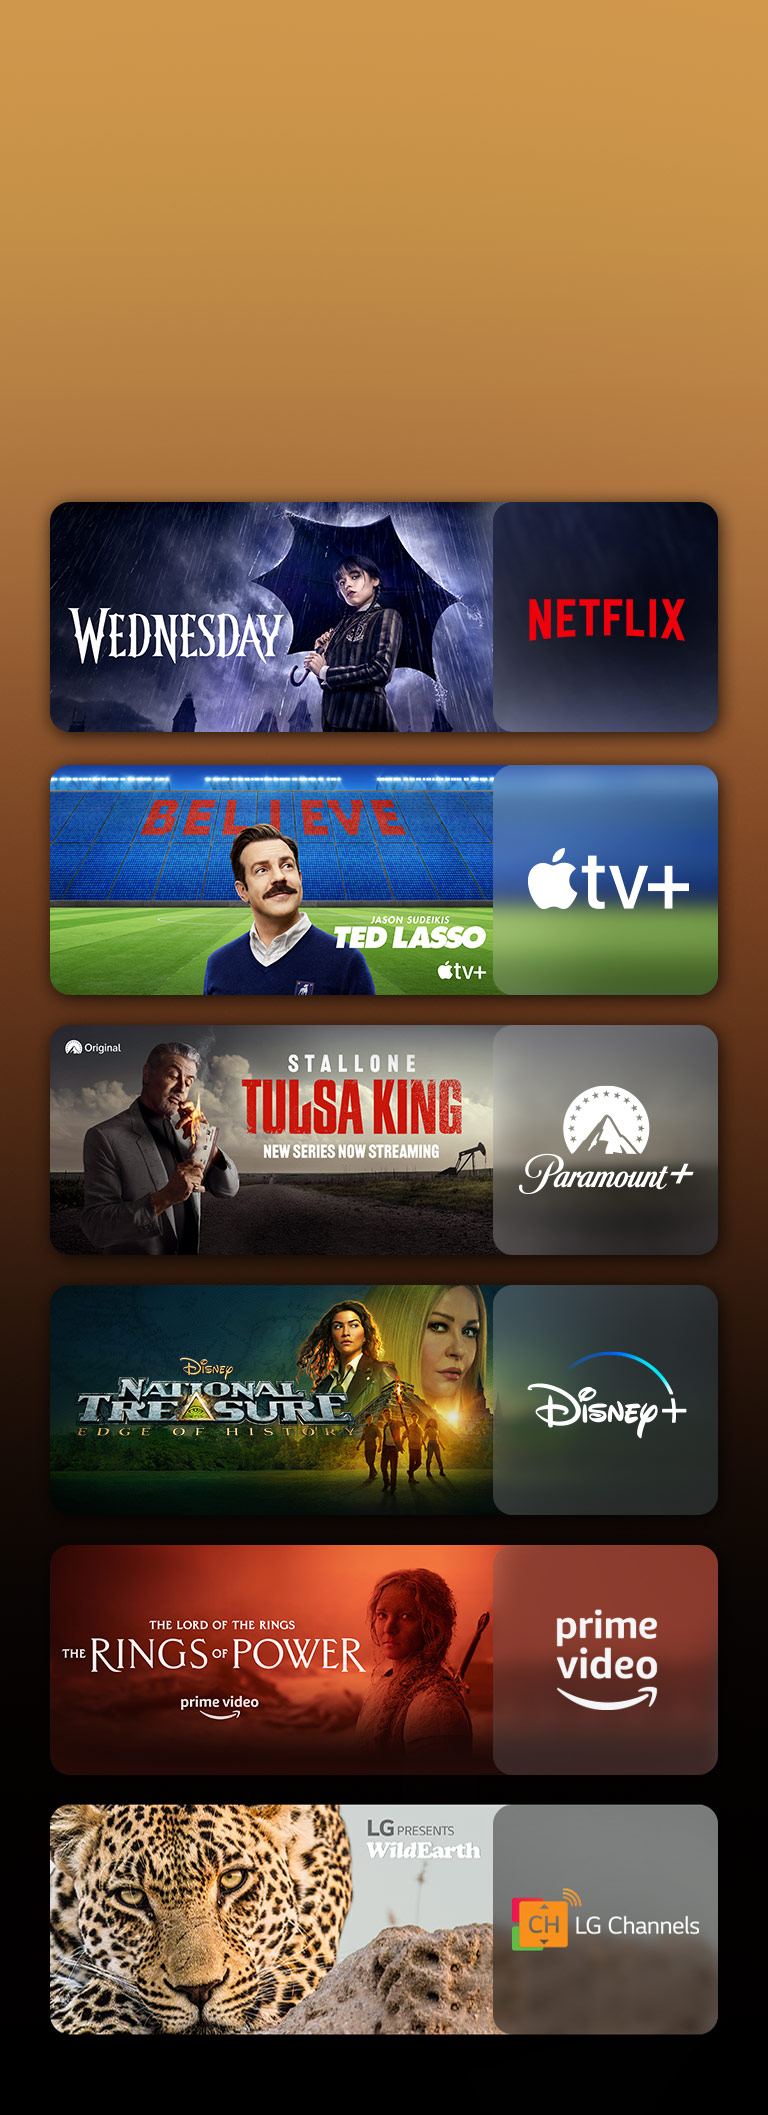 There are logos of streaming service platforms and matching footages right next to each logo. There are images of Netflix's Wednesday, Apple TV's TED LASSO, Paramount+'s Tulsa King, PRIME VIDEO's The rings of power, sky showtime's TOP GUN, and LG CHANNELS' leopard.